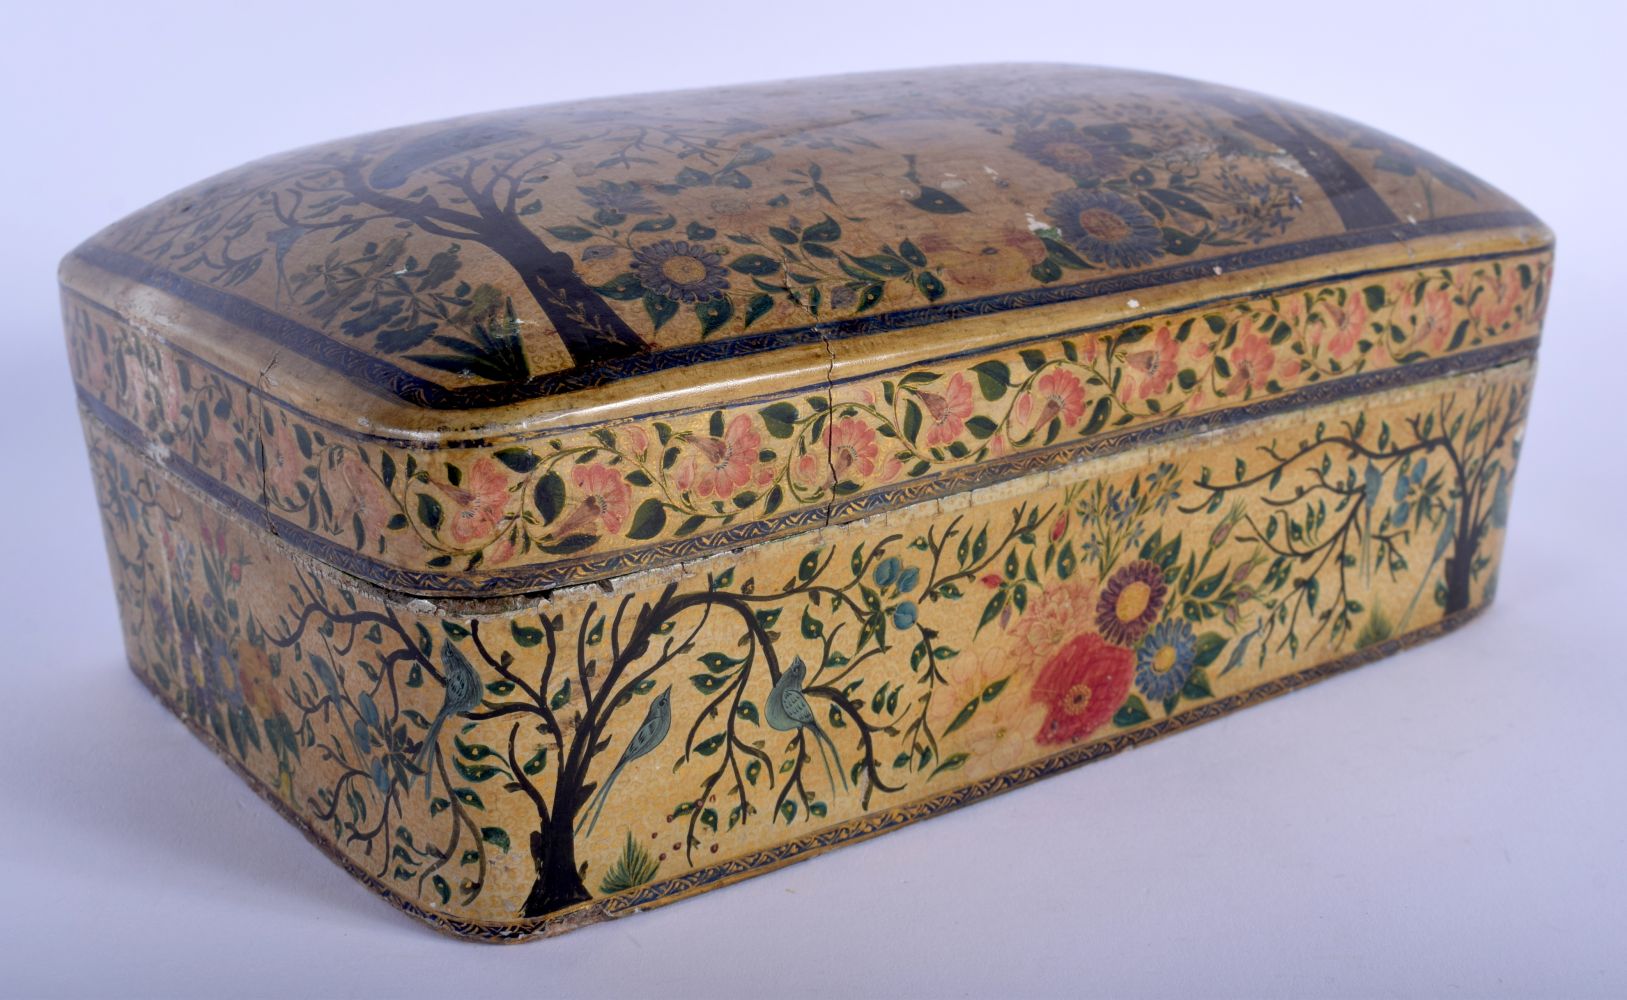 A LARGE EARLY 20TH CENTURY INDIAN PAINTED KASHMIR LACQUER BOX AND COVER painted with birds. 23 cm x